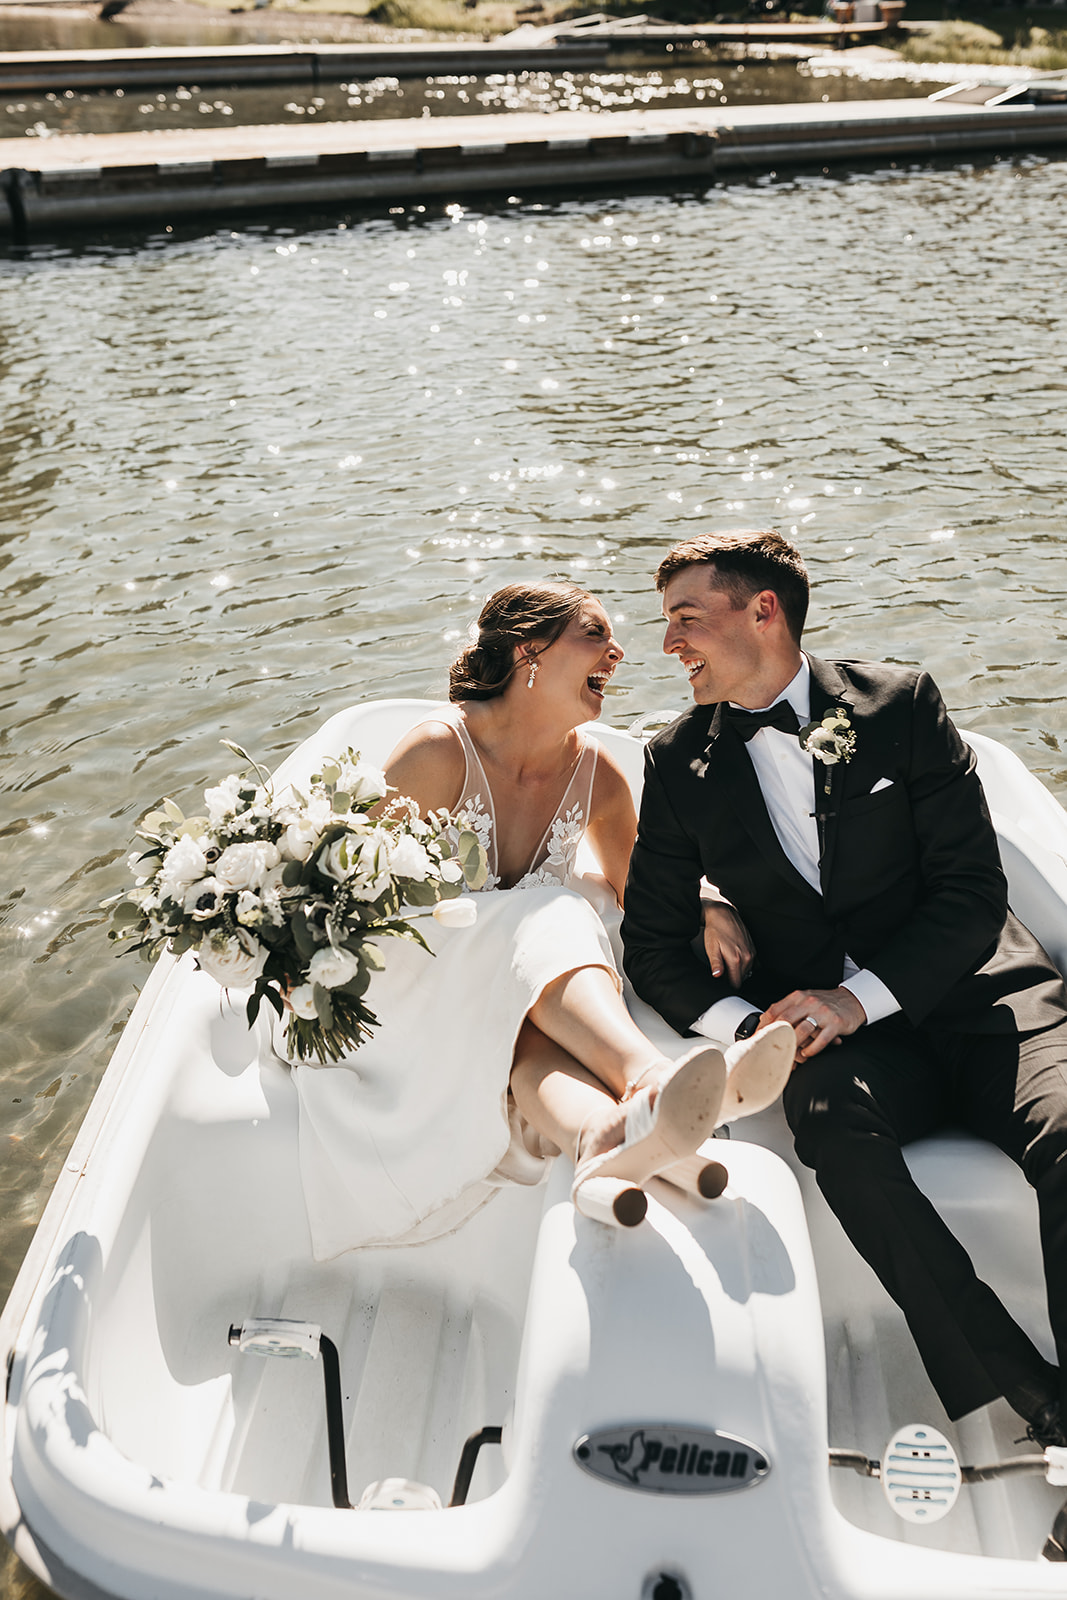 Bride and groom sitting in paddle boat on the lake at lake house wedding.